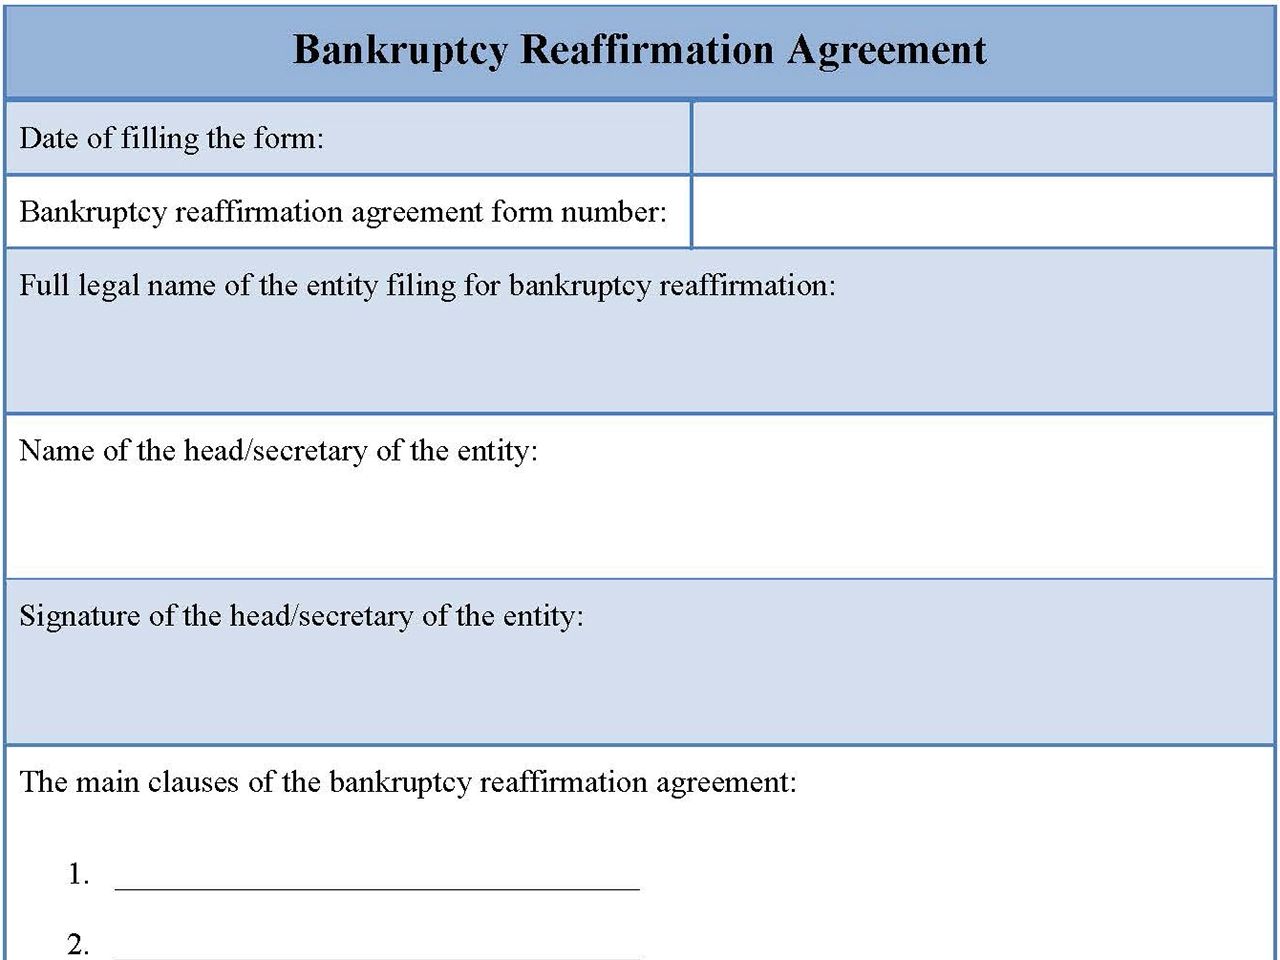 Bankruptcy Reaffirmation Agreement Fillable PDF Template